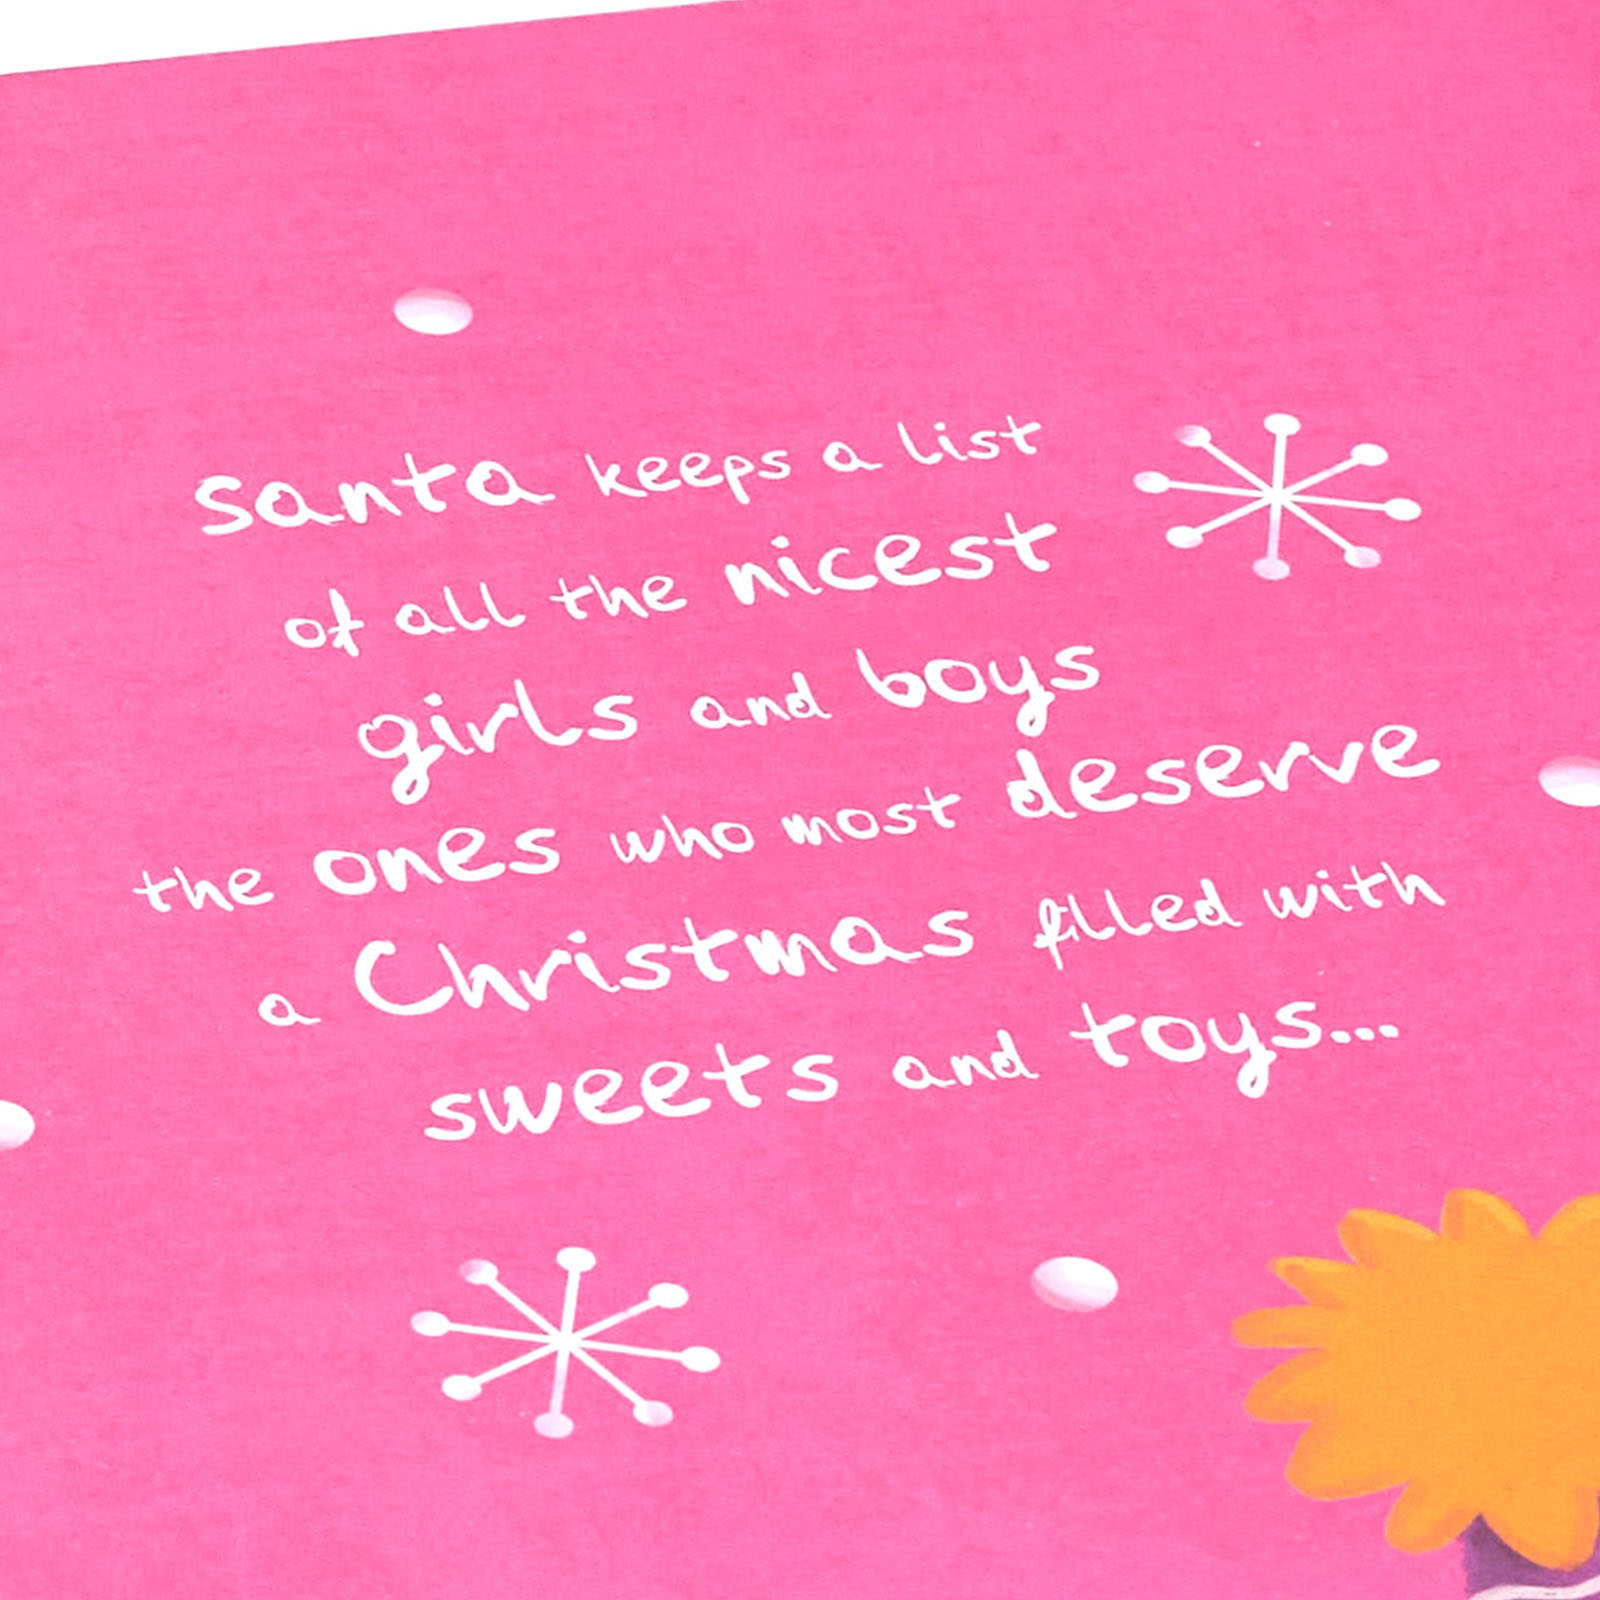 Christmas Card - Special Daughter, Cute Penguin